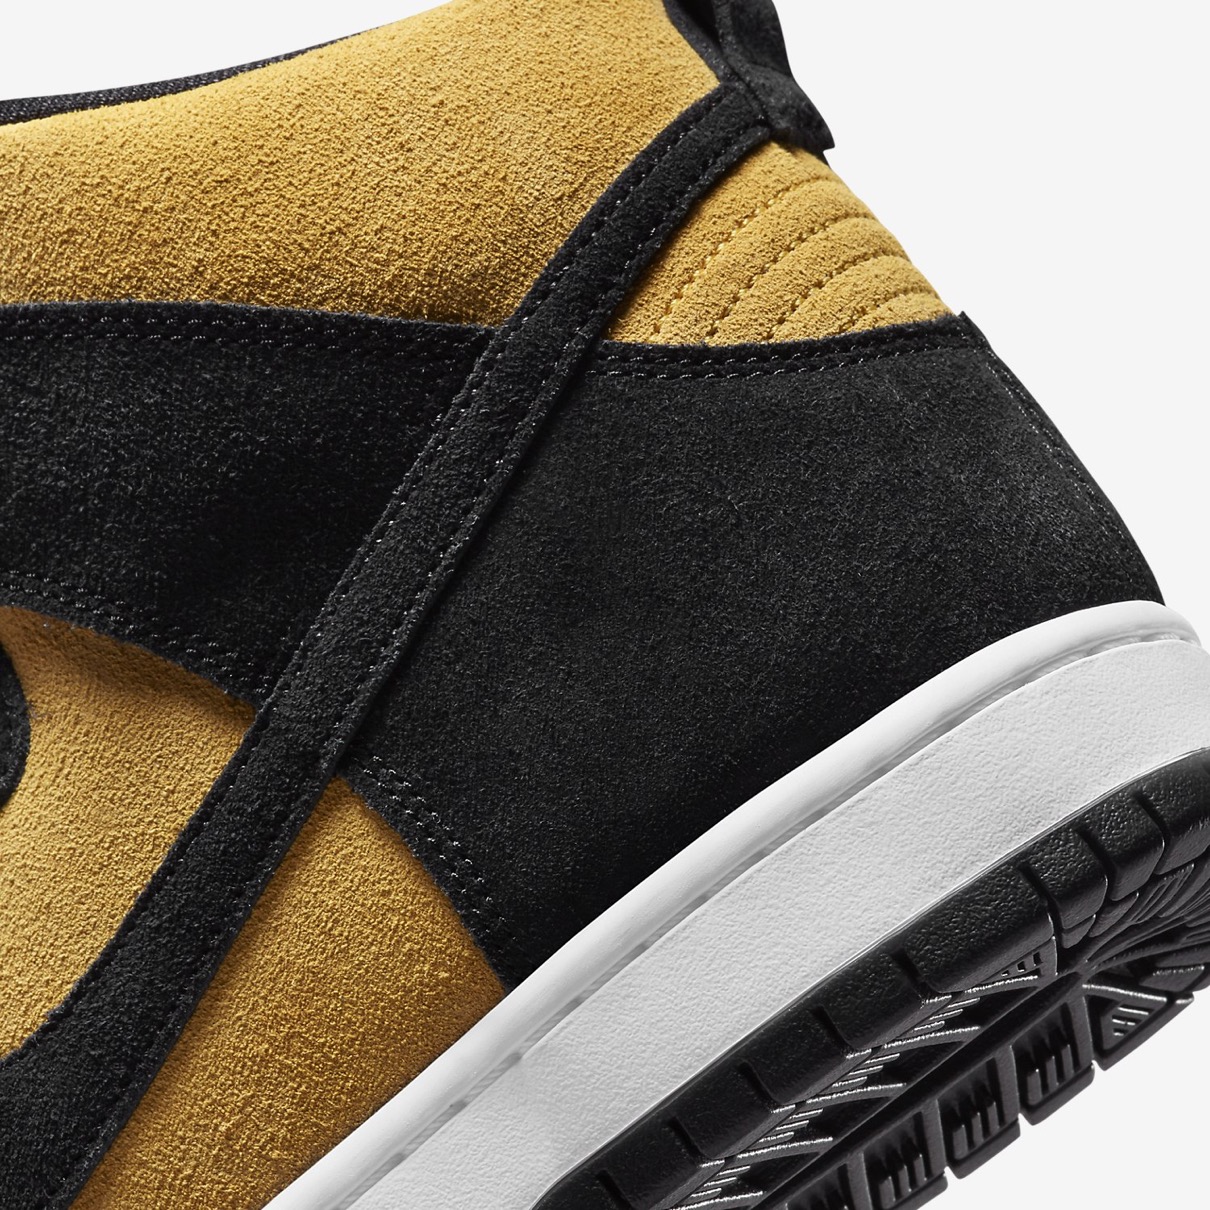 Nike SB】Dunk High Pro “Maize and Black”が国内7月2日より発売予定